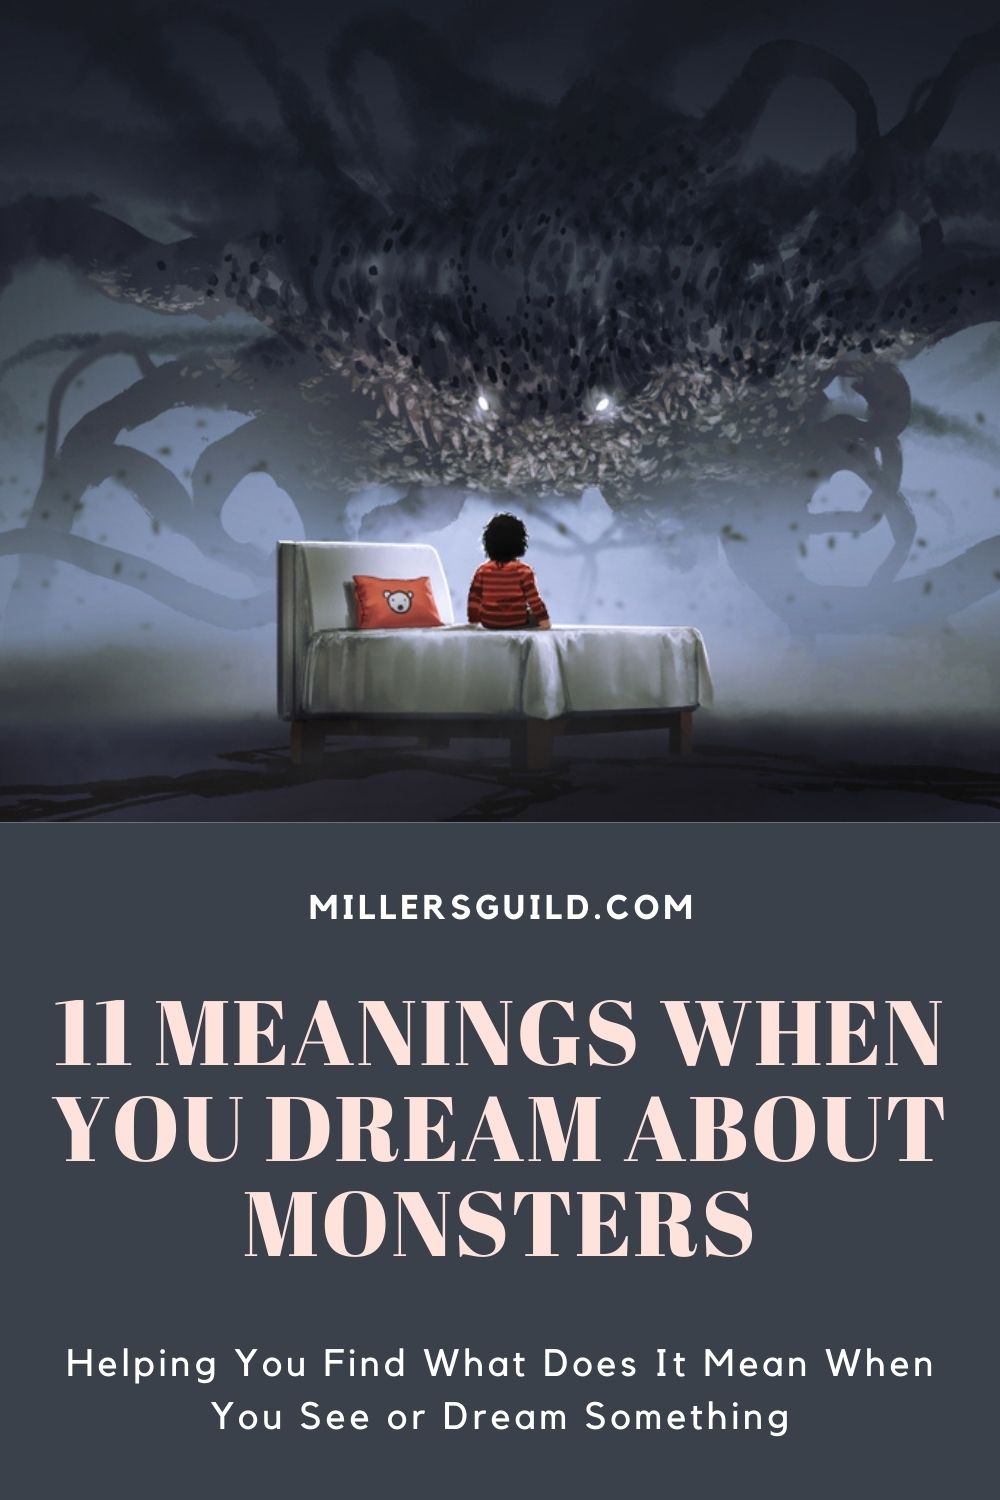 How To Use Monster Dreams For Spiritual Growth